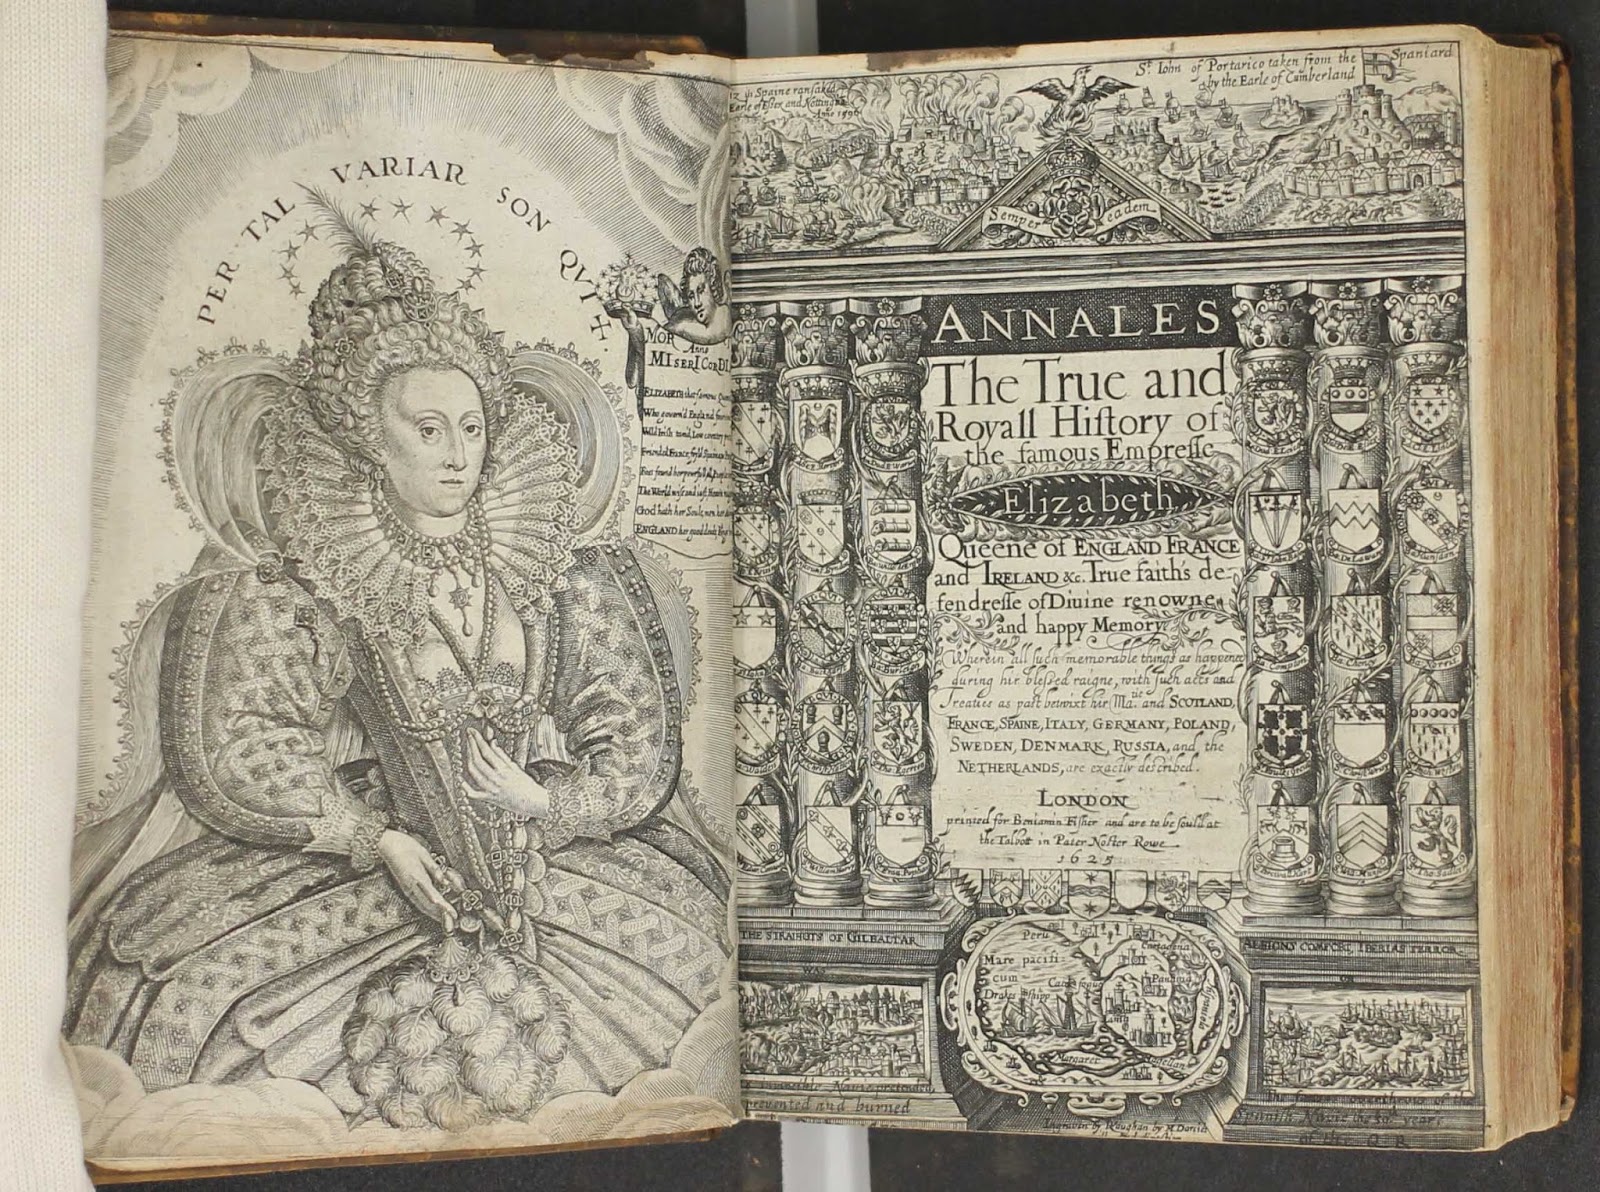 Annales. the Ture and Royall History of the famous Empresse Elizabeth Queen of England, France an Ireland.  with very ornate border decorations and engraving of Elizabeth on the opposite page.